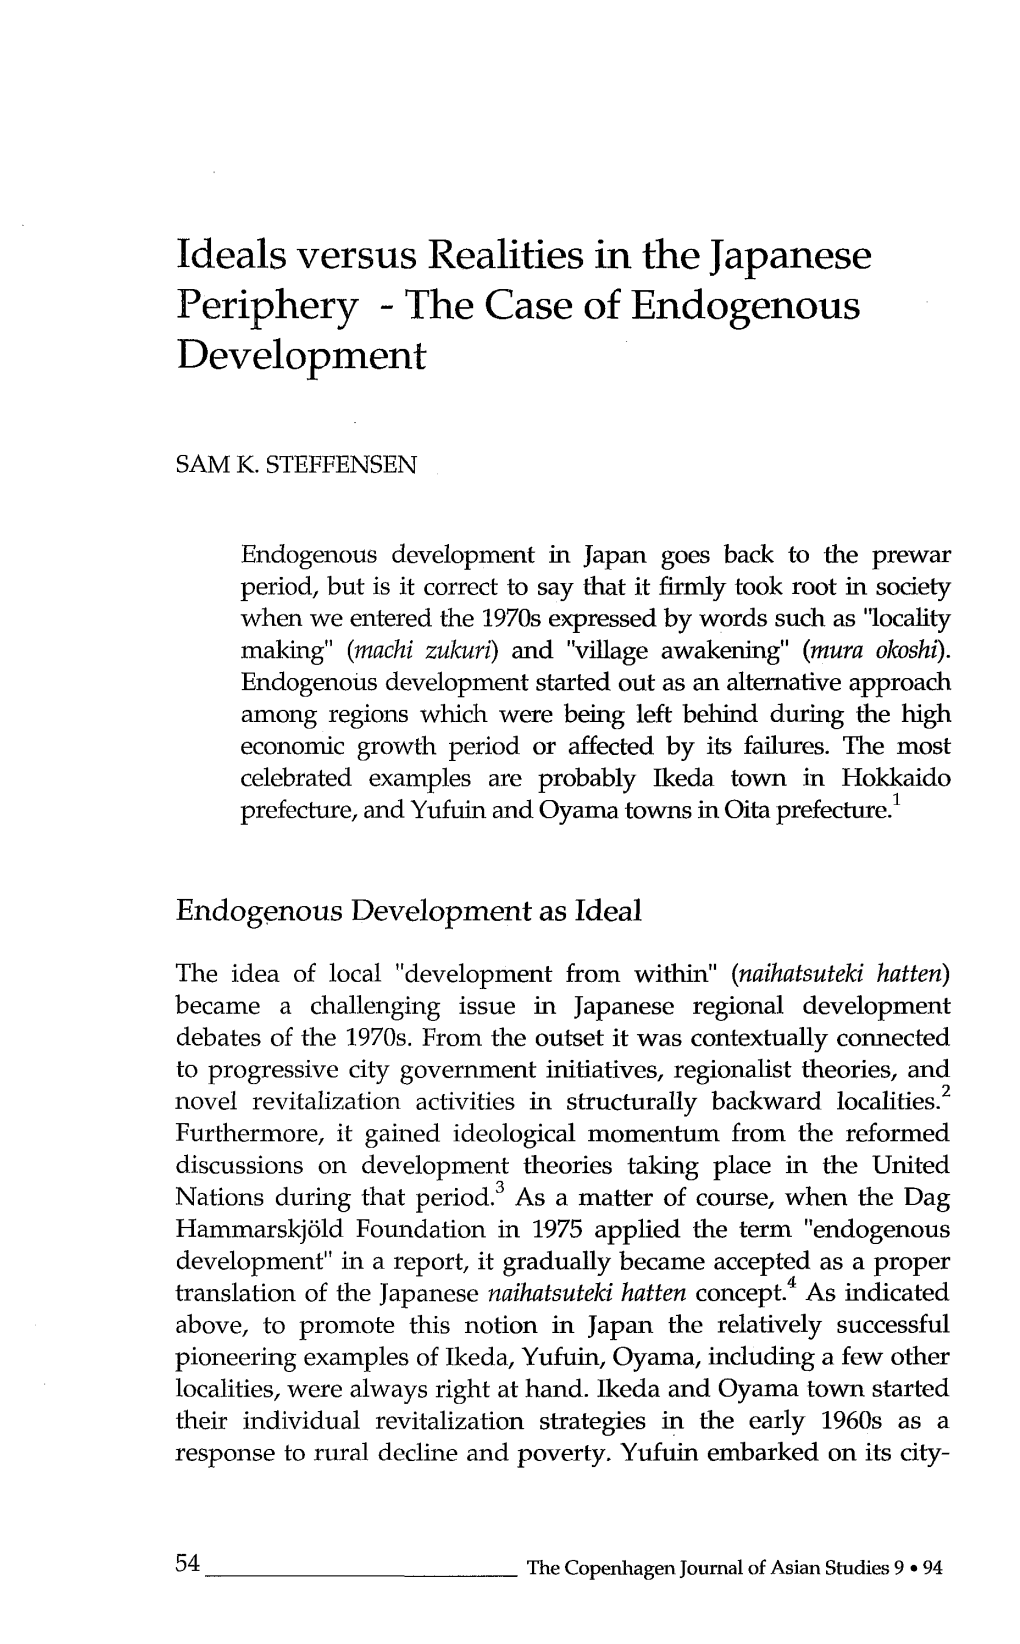 Ideals Versus Realities in the Japanese Periphery - the Case of Endogenous Development